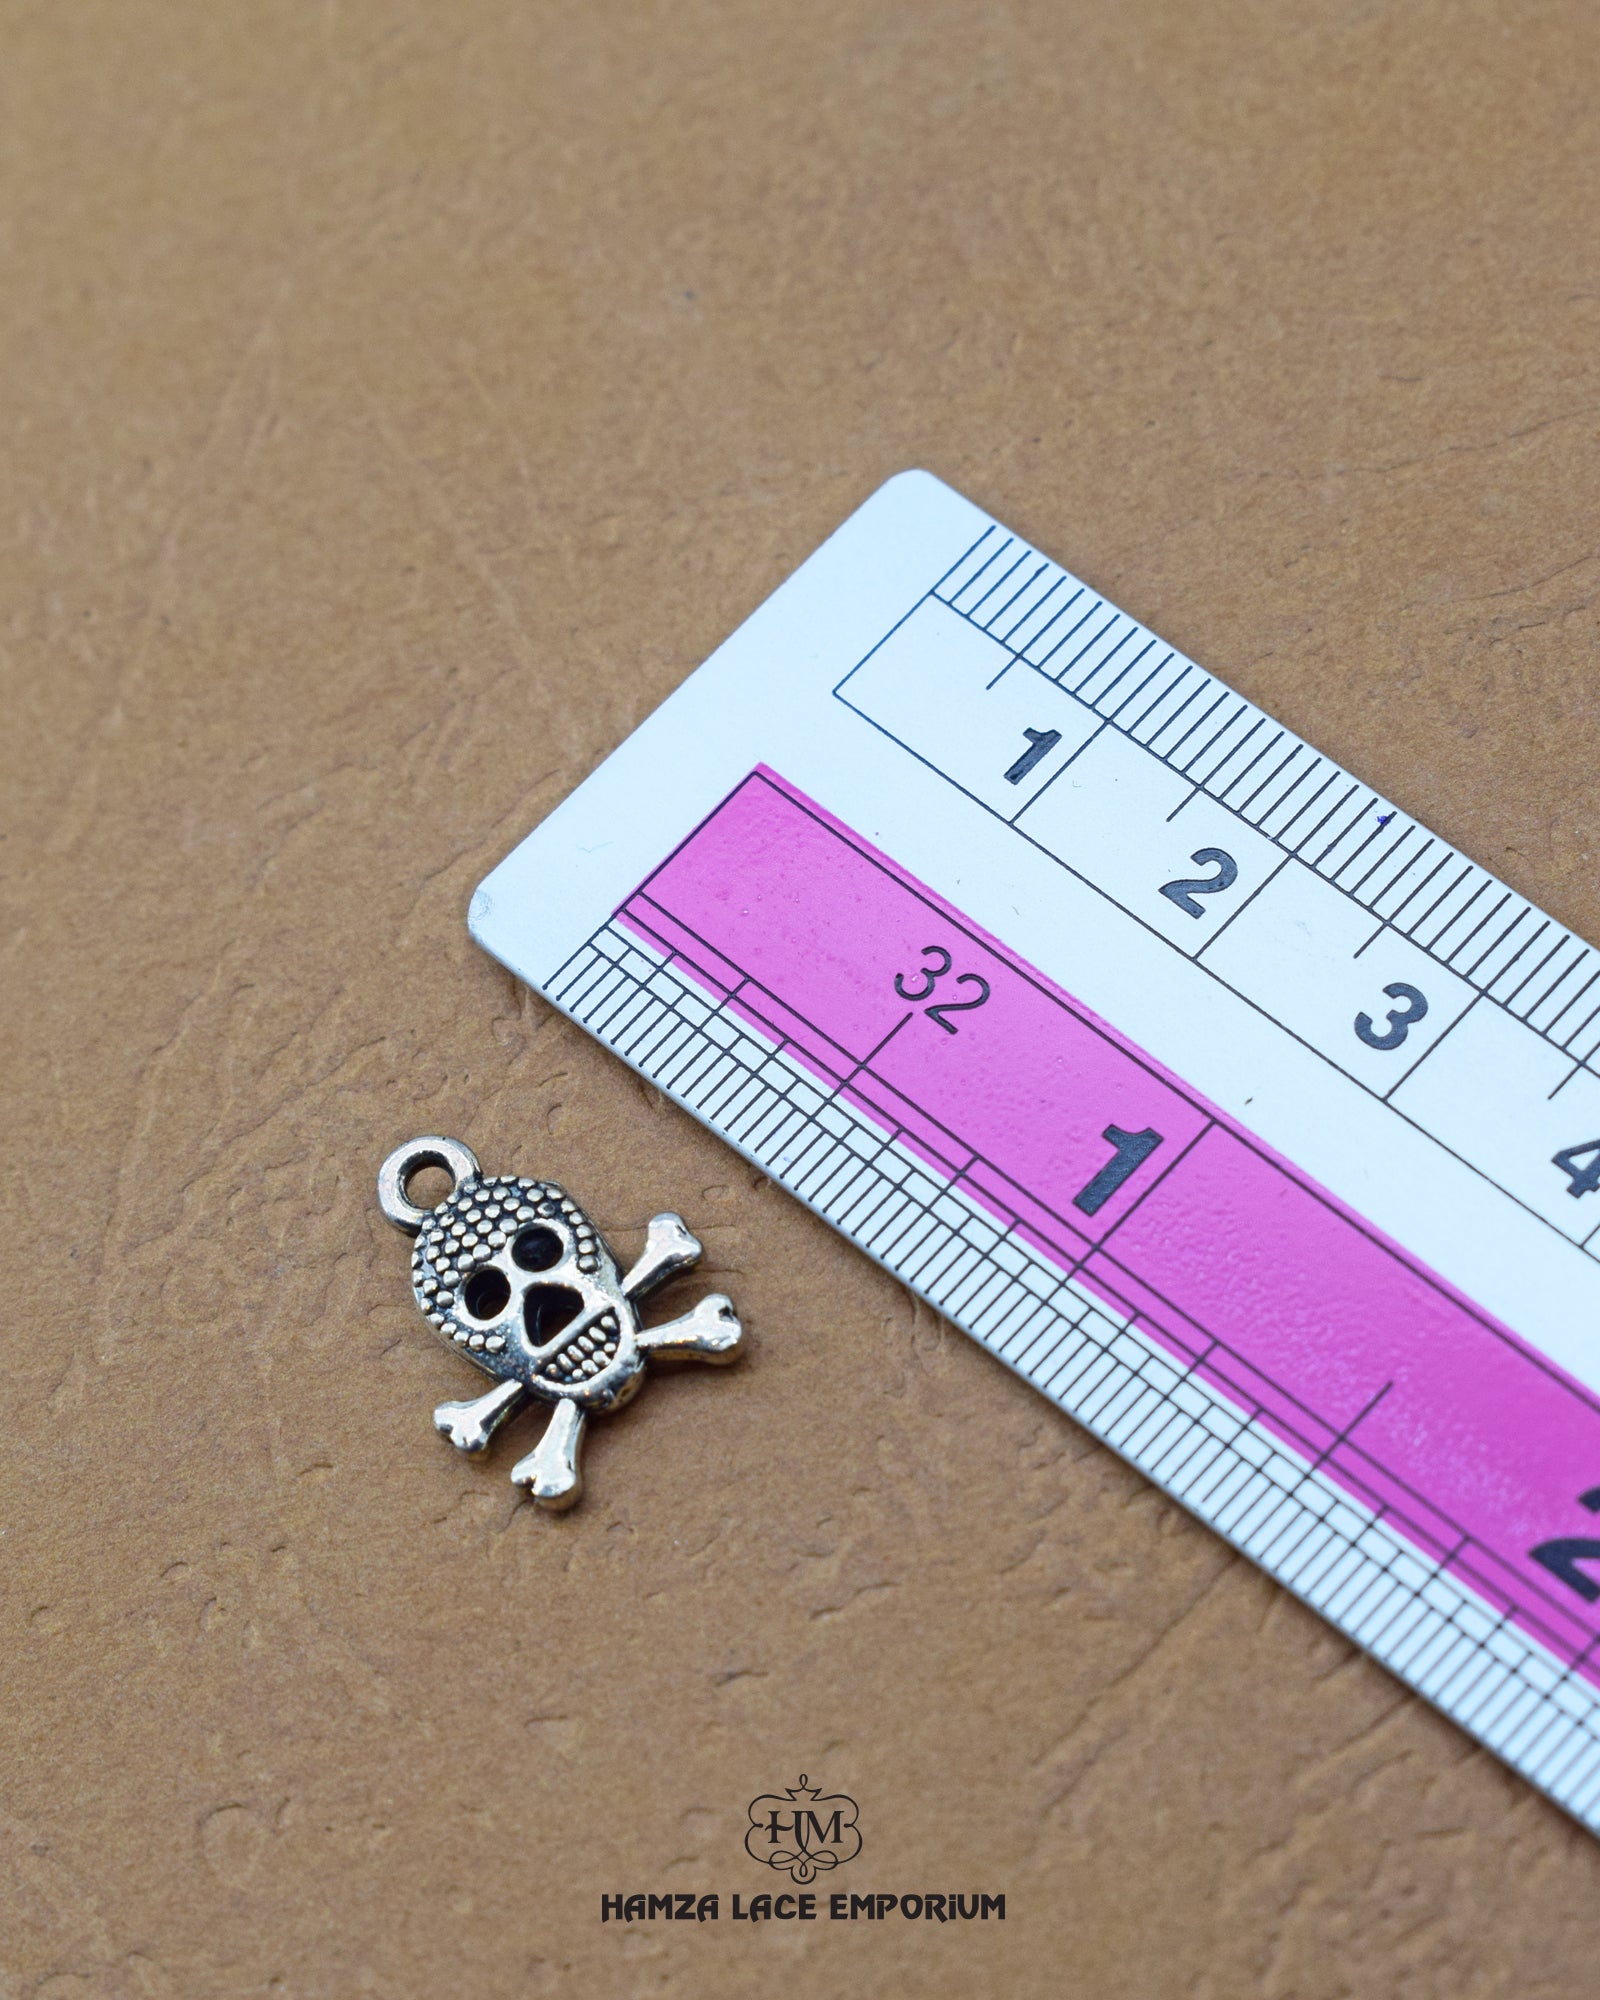 The 'Hanging Metal Button MA435' size is showcased using a ruler for precise measurement.